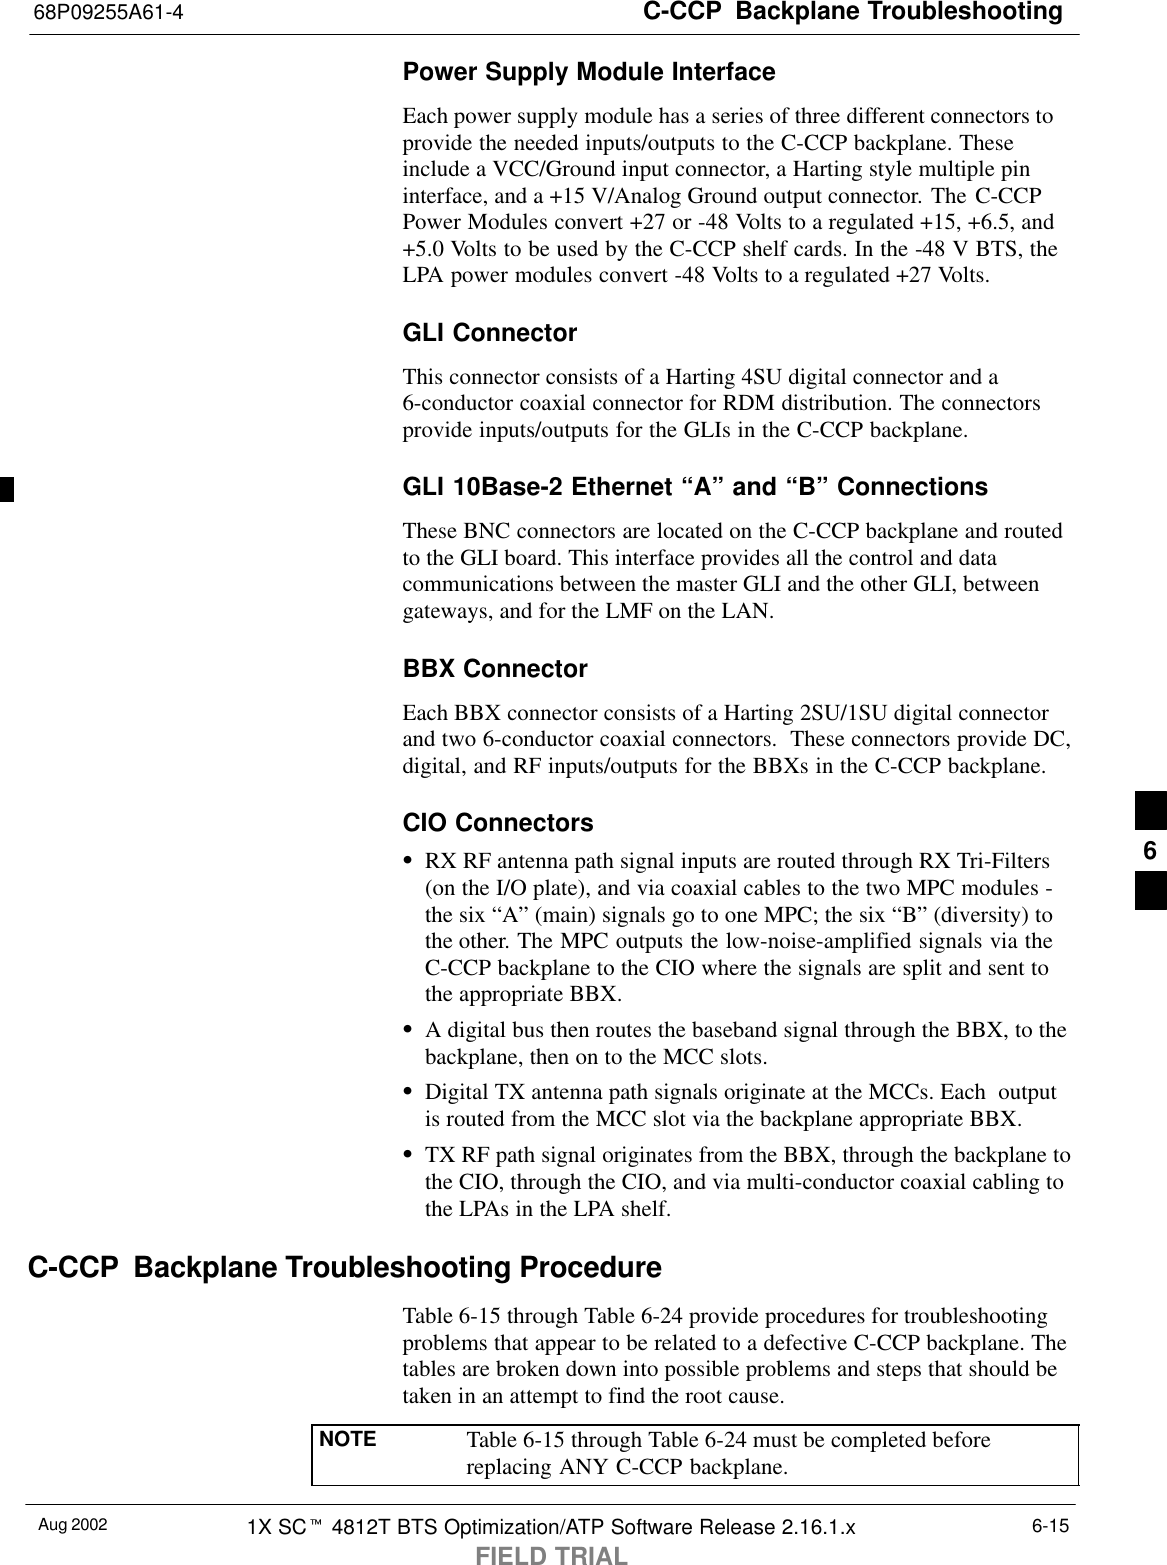 C-CCP  Backplane Troubleshooting68P09255A61-4Aug 2002 1X SCt 4812T BTS Optimization/ATP Software Release 2.16.1.xFIELD TRIAL6-15Power Supply Module InterfaceEach power supply module has a series of three different connectors toprovide the needed inputs/outputs to the C-CCP backplane. Theseinclude a VCC/Ground input connector, a Harting style multiple pininterface, and a +15 V/Analog Ground output connector. The C-CCPPower Modules convert +27 or -48 Volts to a regulated +15, +6.5, and+5.0 Volts to be used by the C-CCP shelf cards. In the -48 V BTS, theLPA power modules convert -48 Volts to a regulated +27 Volts.GLI ConnectorThis connector consists of a Harting 4SU digital connector and a6-conductor coaxial connector for RDM distribution. The connectorsprovide inputs/outputs for the GLIs in the C-CCP backplane.GLI 10Base-2 Ethernet “A” and “B” ConnectionsThese BNC connectors are located on the C-CCP backplane and routedto the GLI board. This interface provides all the control and datacommunications between the master GLI and the other GLI, betweengateways, and for the LMF on the LAN.BBX ConnectorEach BBX connector consists of a Harting 2SU/1SU digital connectorand two 6-conductor coaxial connectors.  These connectors provide DC,digital, and RF inputs/outputs for the BBXs in the C-CCP backplane.CIO ConnectorsSRX RF antenna path signal inputs are routed through RX Tri-Filters(on the I/O plate), and via coaxial cables to the two MPC modules -the six “A” (main) signals go to one MPC; the six “B” (diversity) tothe other. The MPC outputs the low-noise-amplified signals via theC-CCP backplane to the CIO where the signals are split and sent tothe appropriate BBX.SA digital bus then routes the baseband signal through the BBX, to thebackplane, then on to the MCC slots.SDigital TX antenna path signals originate at the MCCs. Each  outputis routed from the MCC slot via the backplane appropriate BBX.STX RF path signal originates from the BBX, through the backplane tothe CIO, through the CIO, and via multi-conductor coaxial cabling tothe LPAs in the LPA shelf.C-CCP  Backplane Troubleshooting ProcedureTable 6-15 through Table 6-24 provide procedures for troubleshootingproblems that appear to be related to a defective C-CCP backplane. Thetables are broken down into possible problems and steps that should betaken in an attempt to find the root cause.NOTE Table 6-15 through Table 6-24 must be completed beforereplacing ANY C-CCP backplane.6